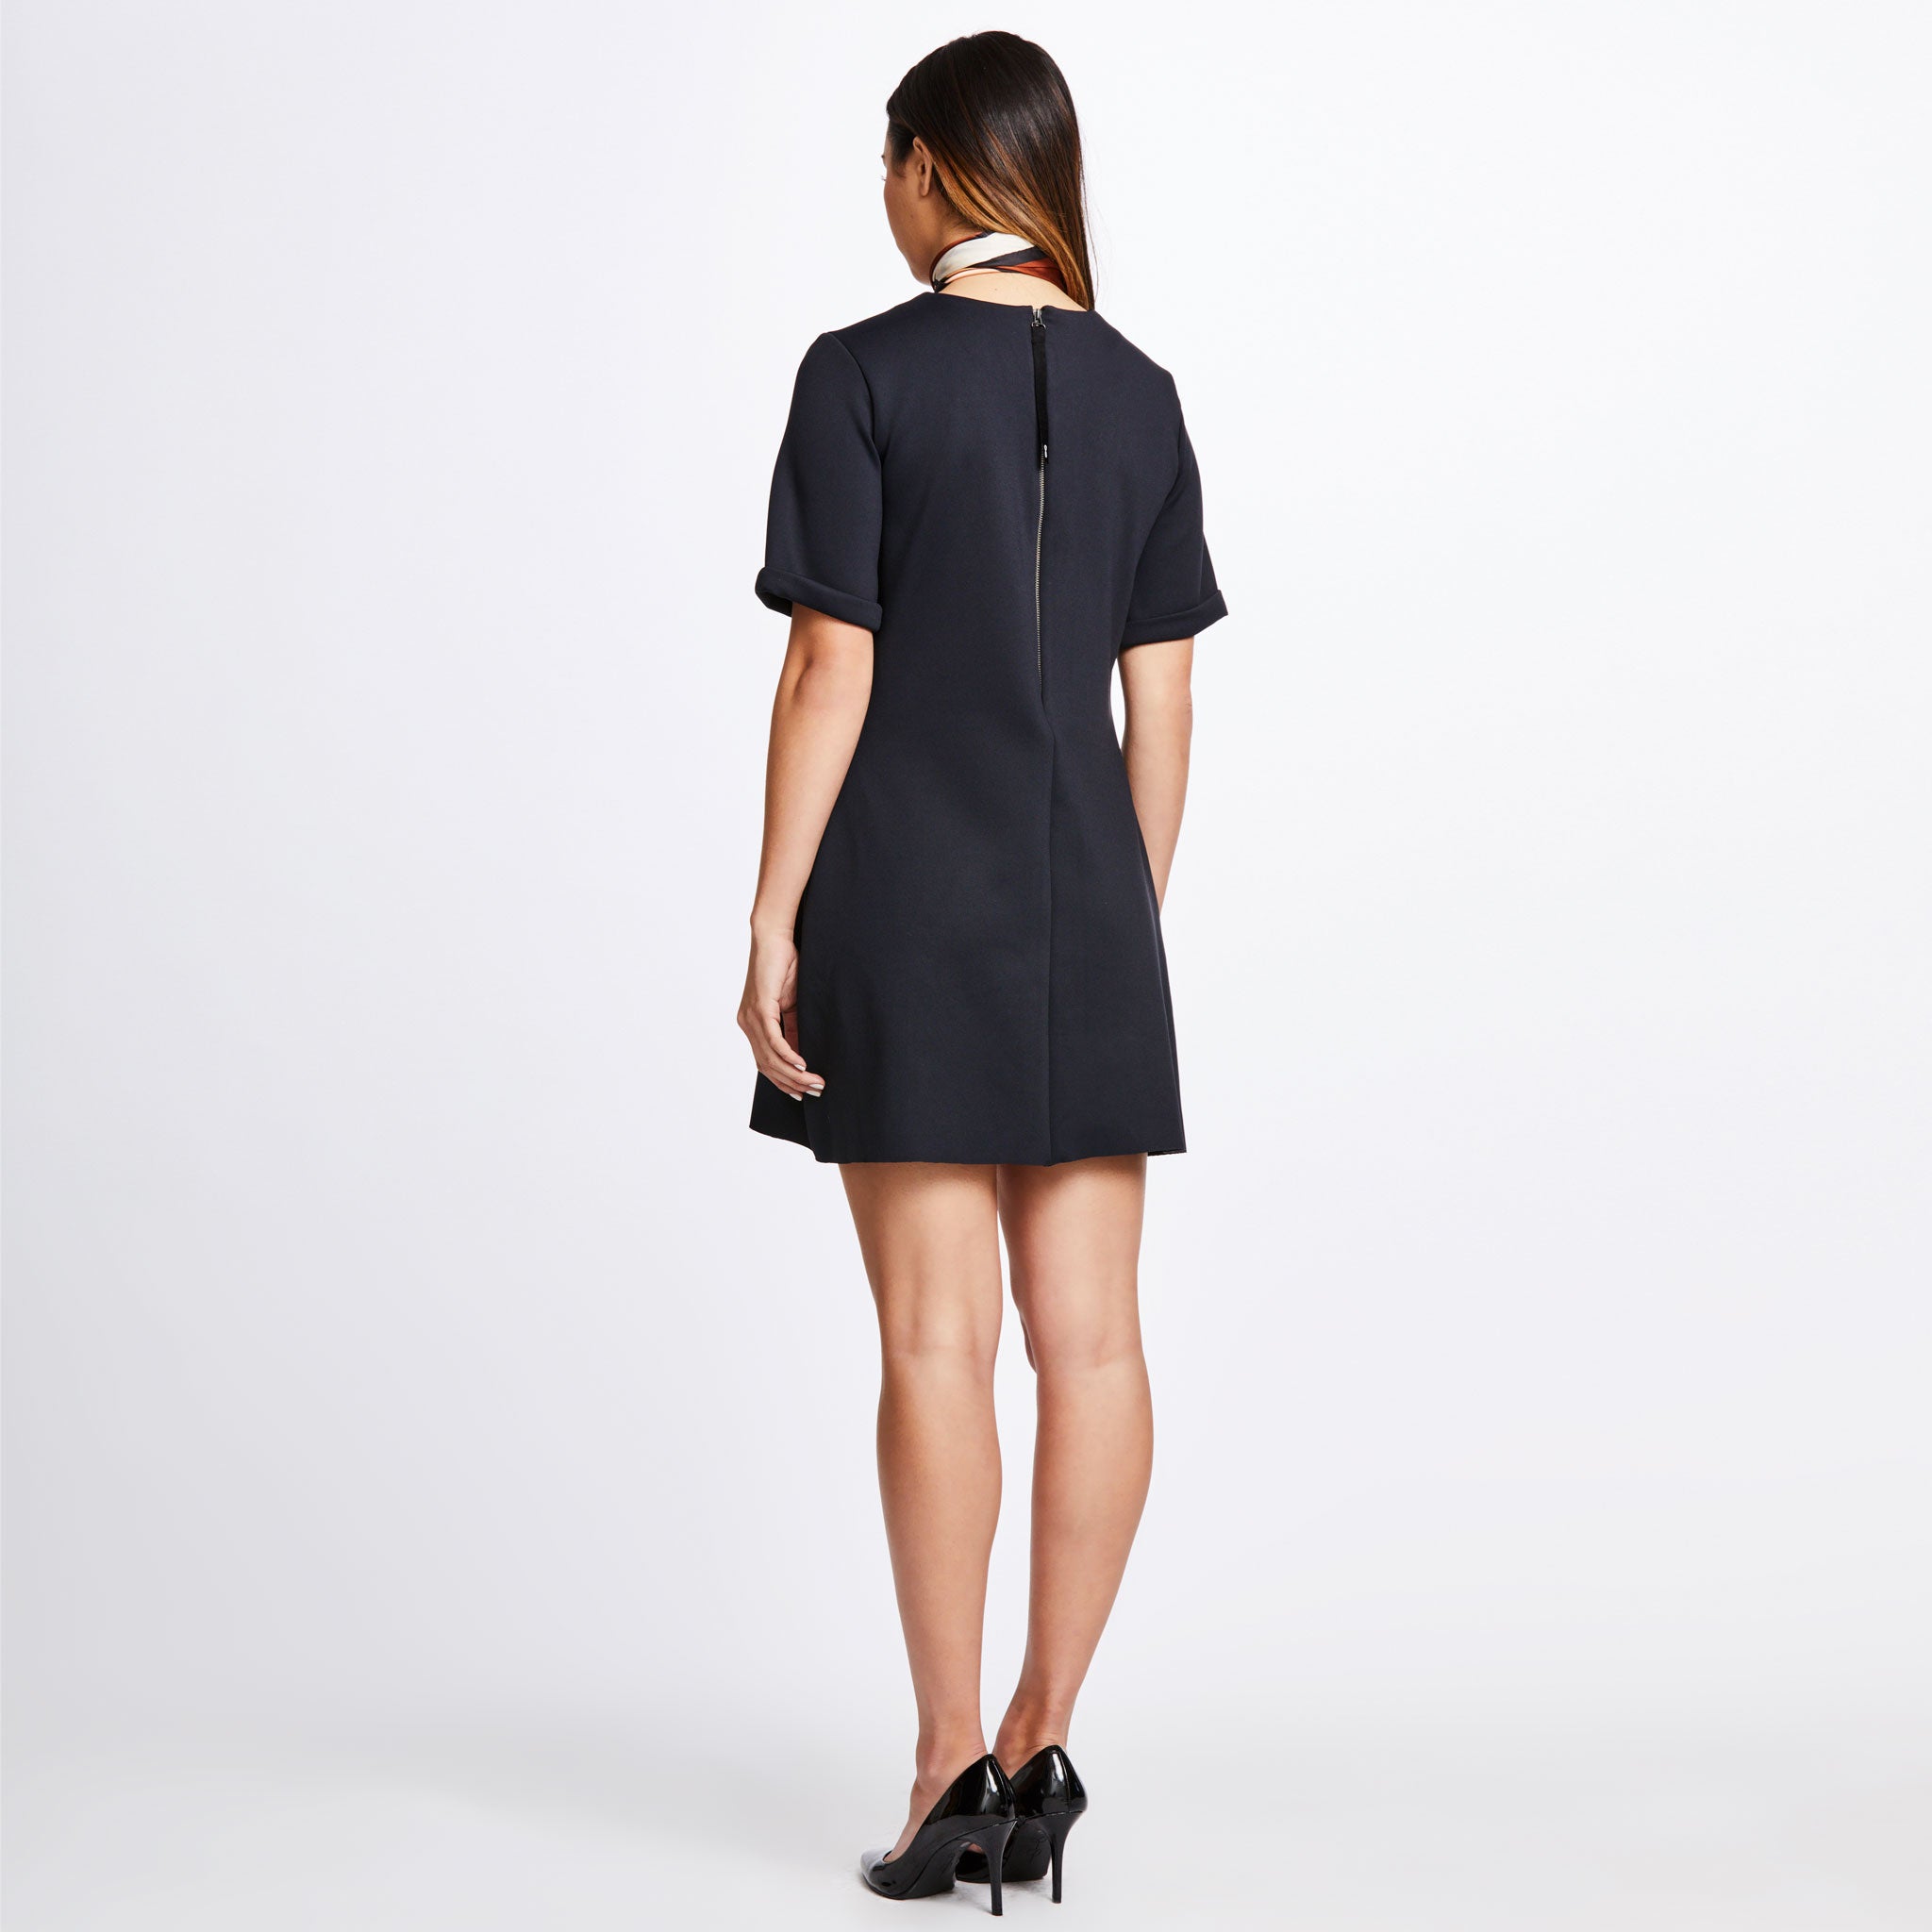 The Flossie Dress